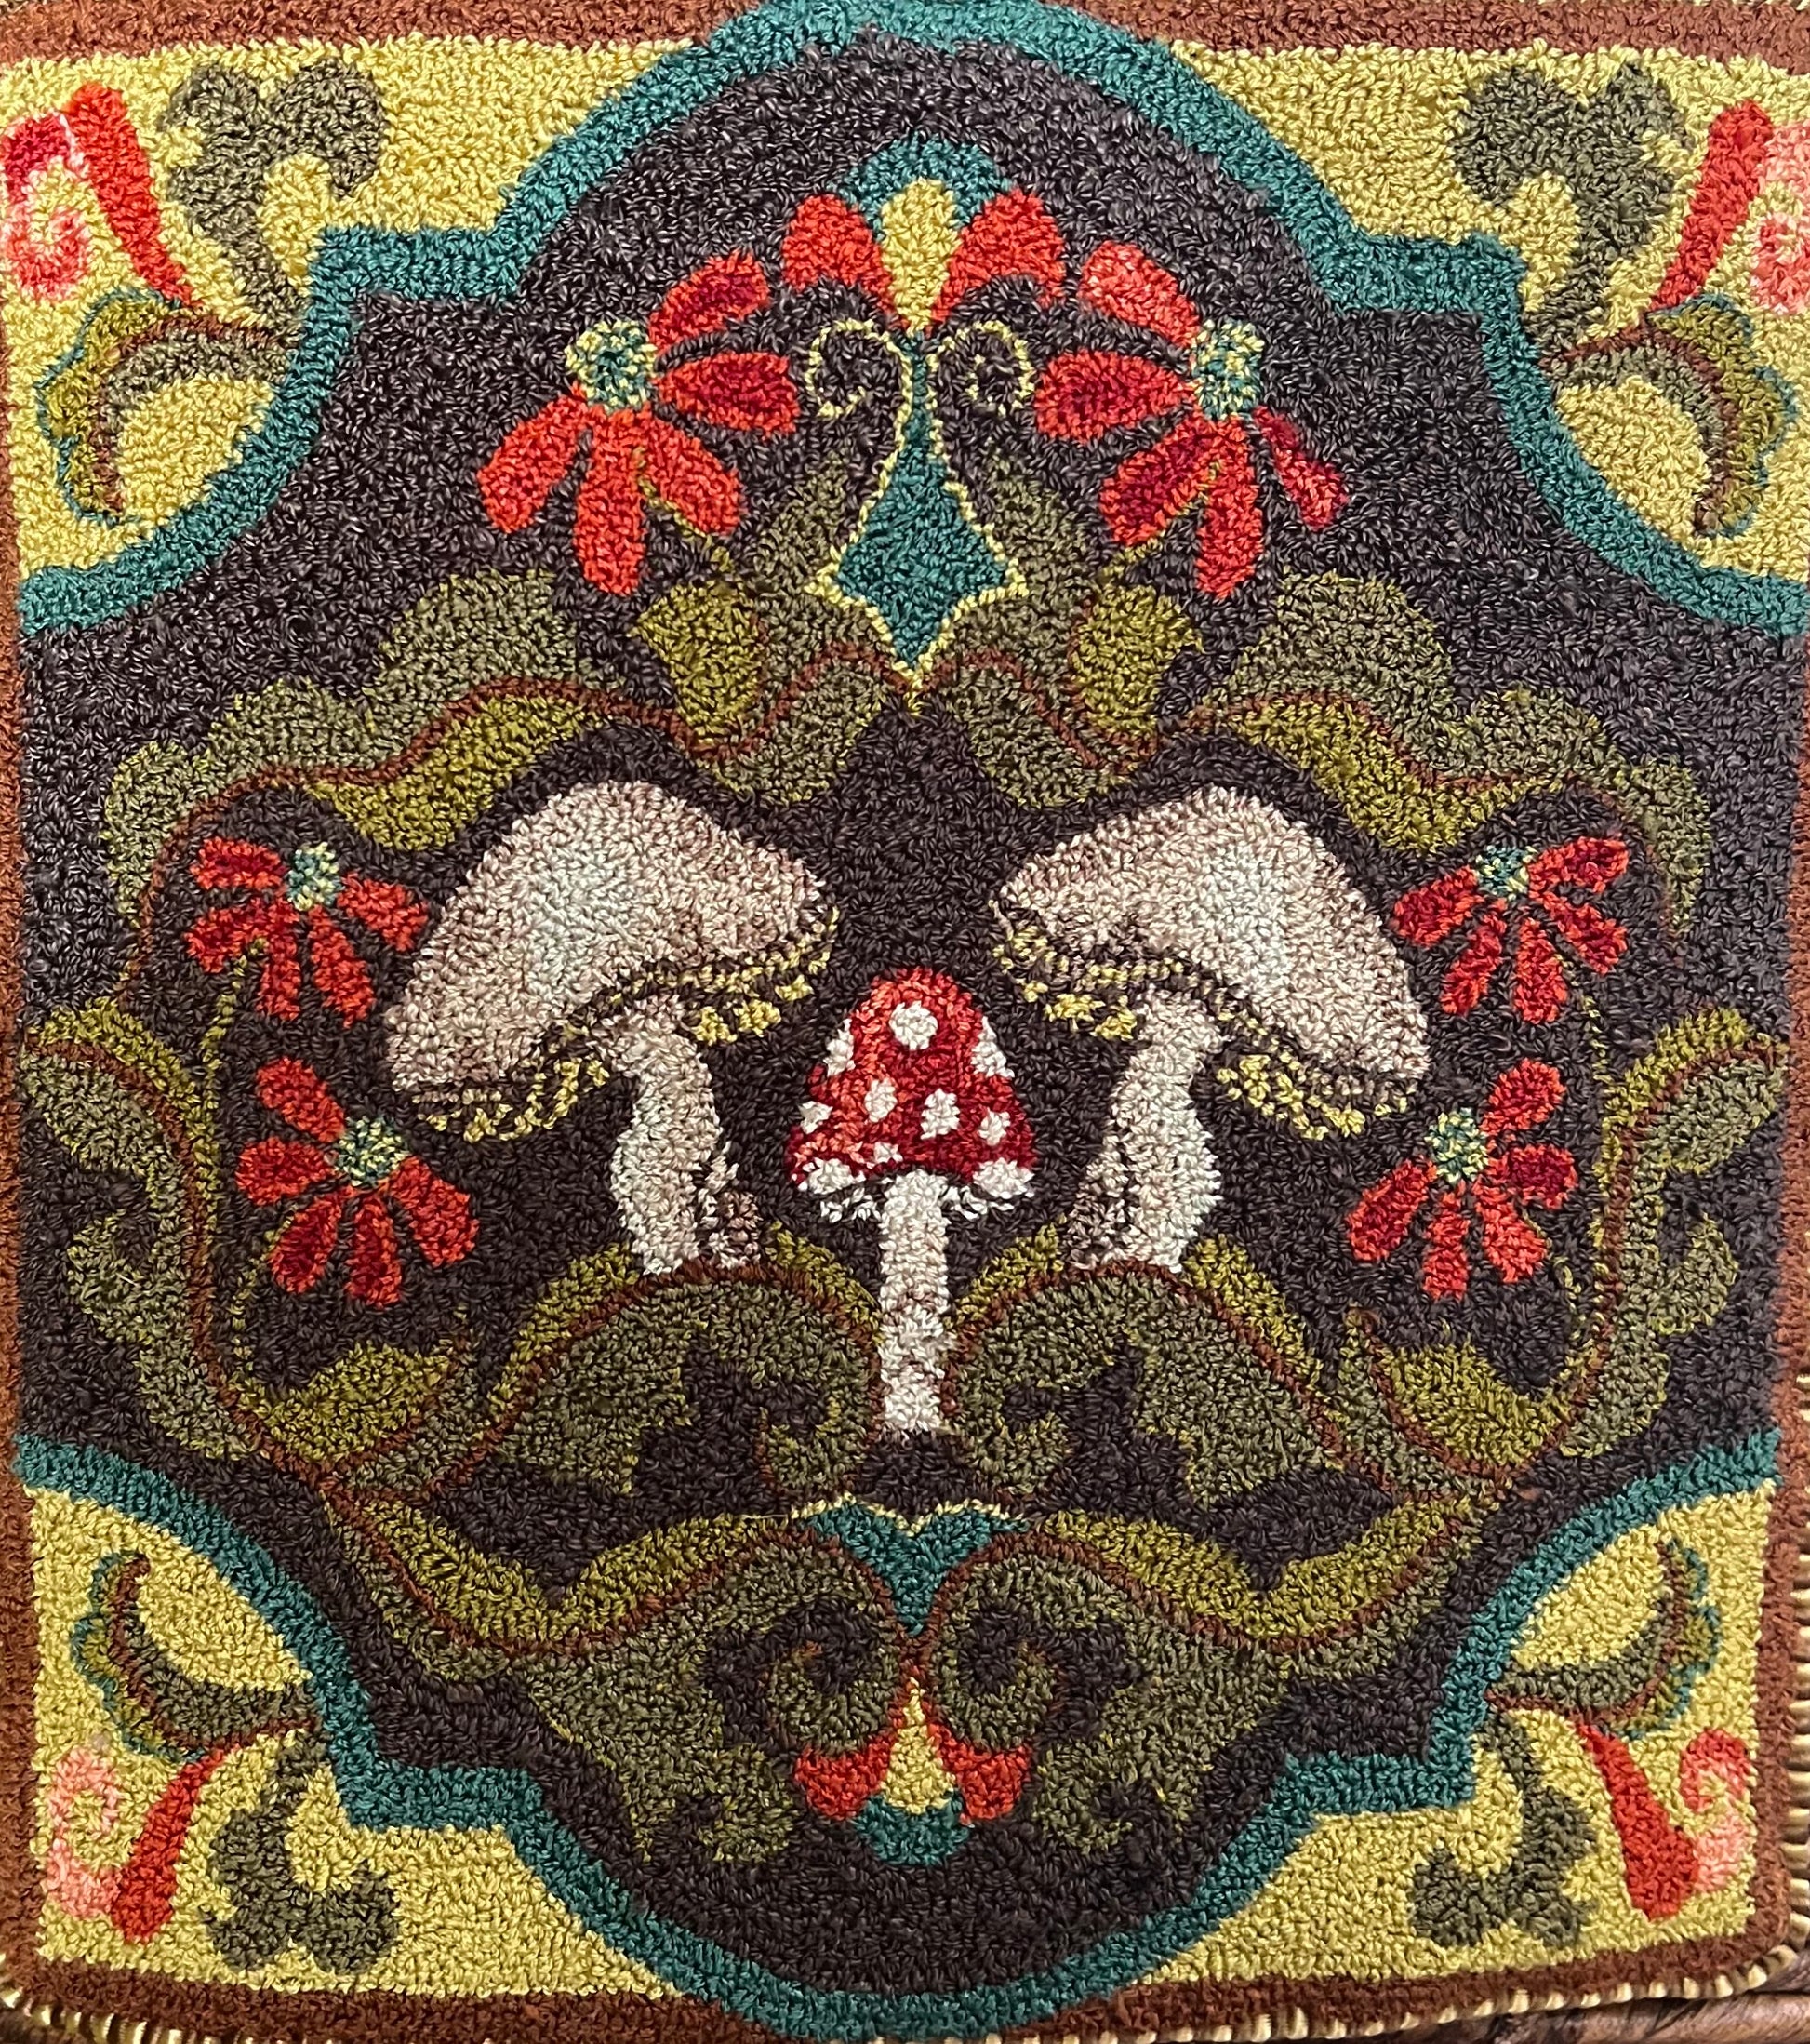 The Fungi Forest PDF Rug Hooking, Rug Punch Needle Pattern by Orphaned Wool. This wonderful woodsy mushroom forest pattern is a 5 page digital download pattern designed to be enlarged to create a larger version of the design used for rug hooking. The Fungi Forest pattern Copyright © 2023 Kelly Kanyok- Orphaned Wool.